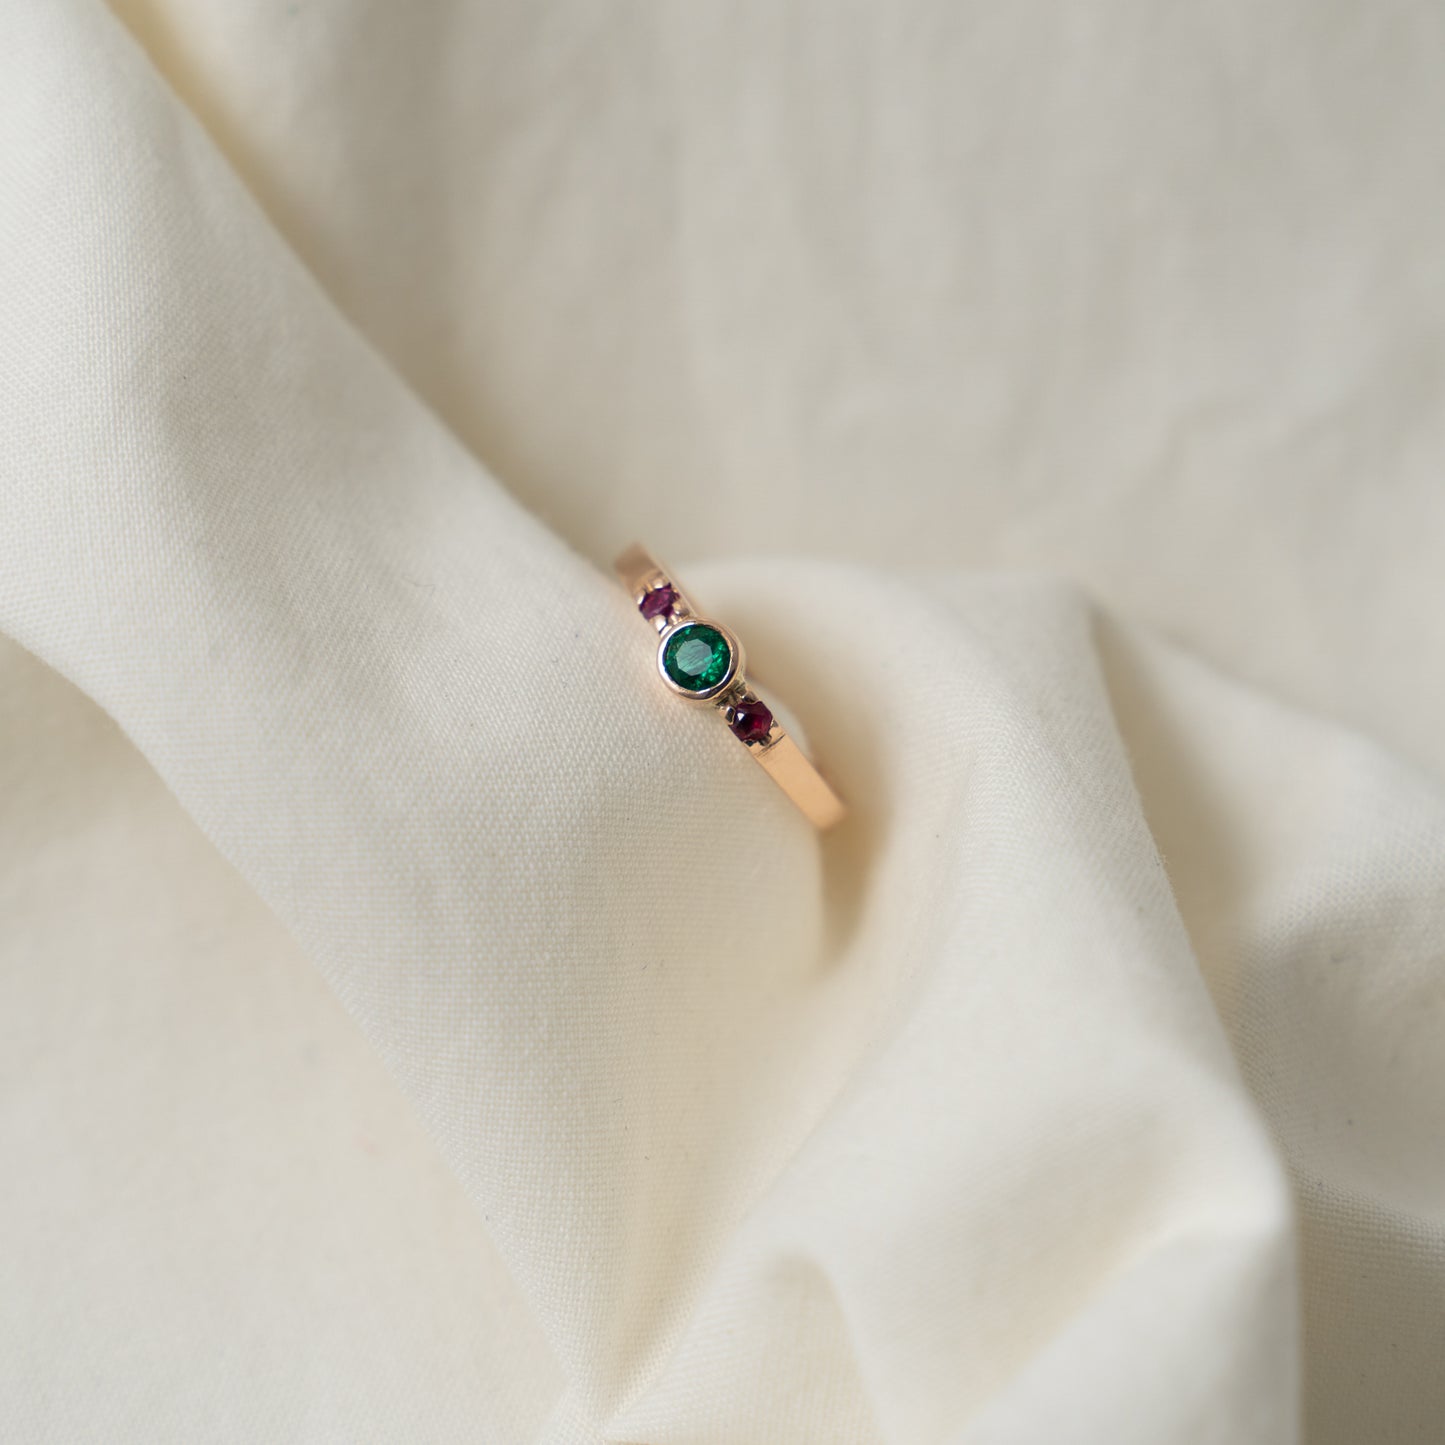 Emerald and ruby ring set in 10k rose gold